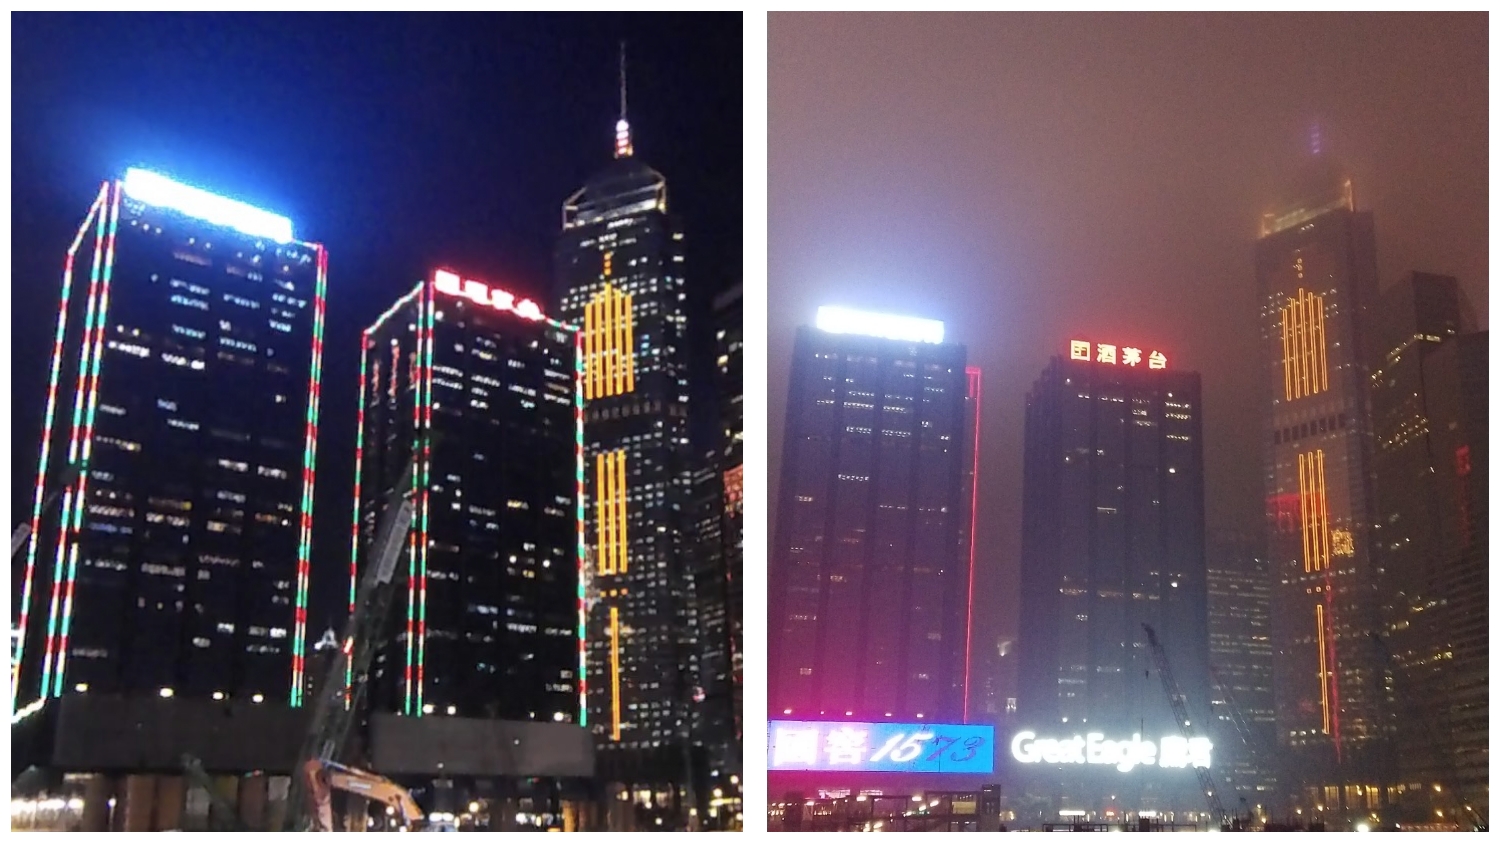 Central Plaza (the taller one) on clear night and foggy night.